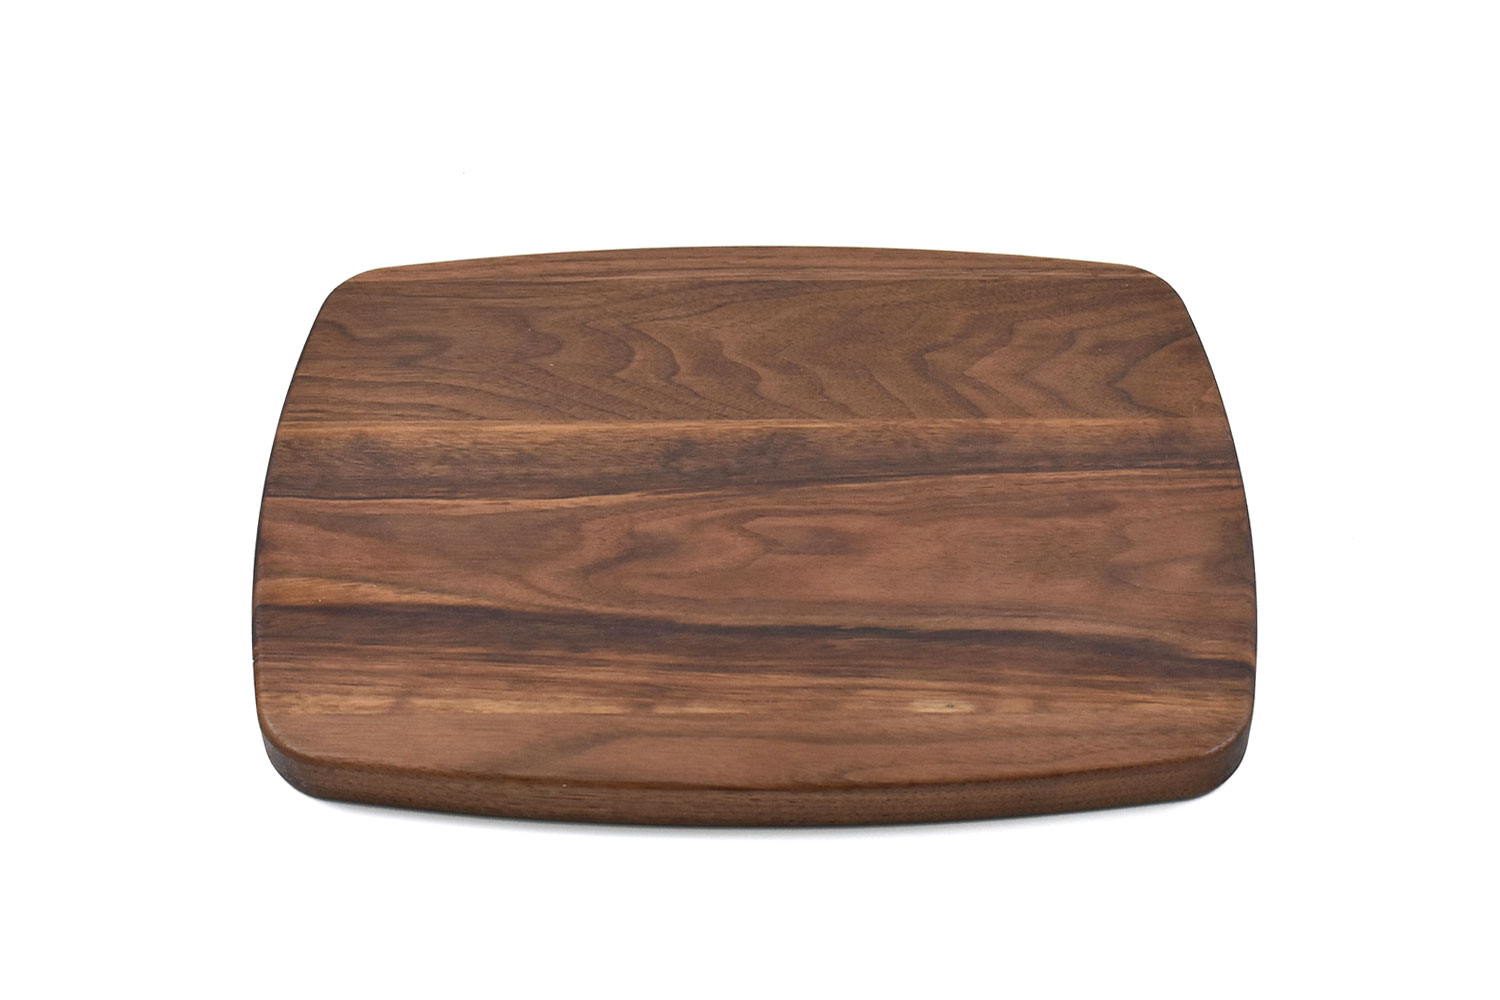 Walnut rectangular curved cutting board with rounded corners